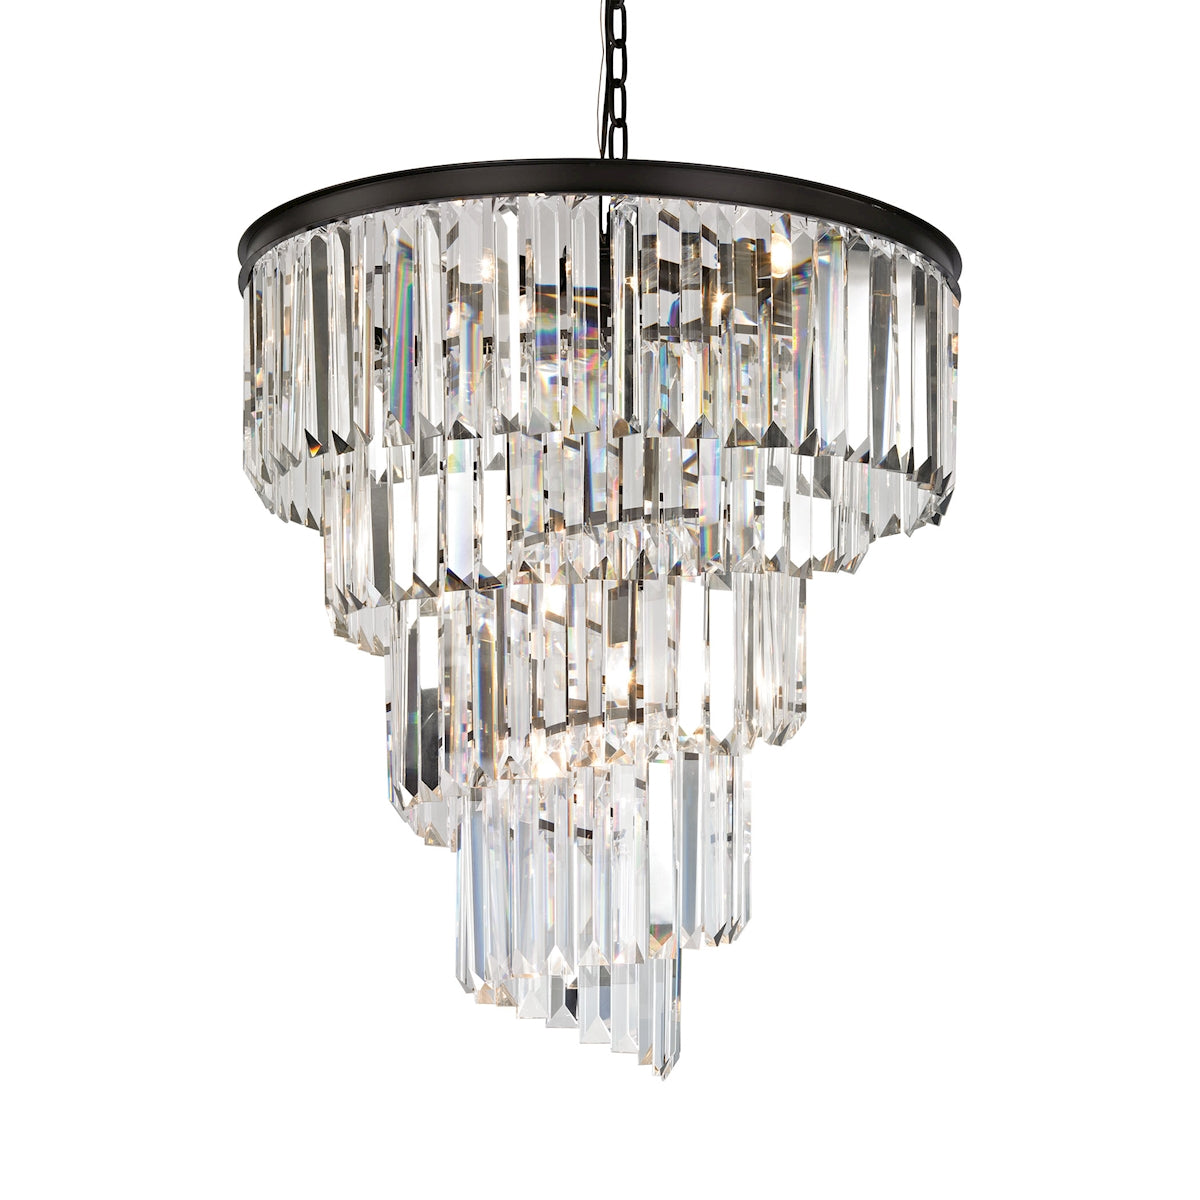 ELK Lighting 14218/9 Palacial 9-Light Chandelier in Oil Rubbed Bronze with Clear Crystal